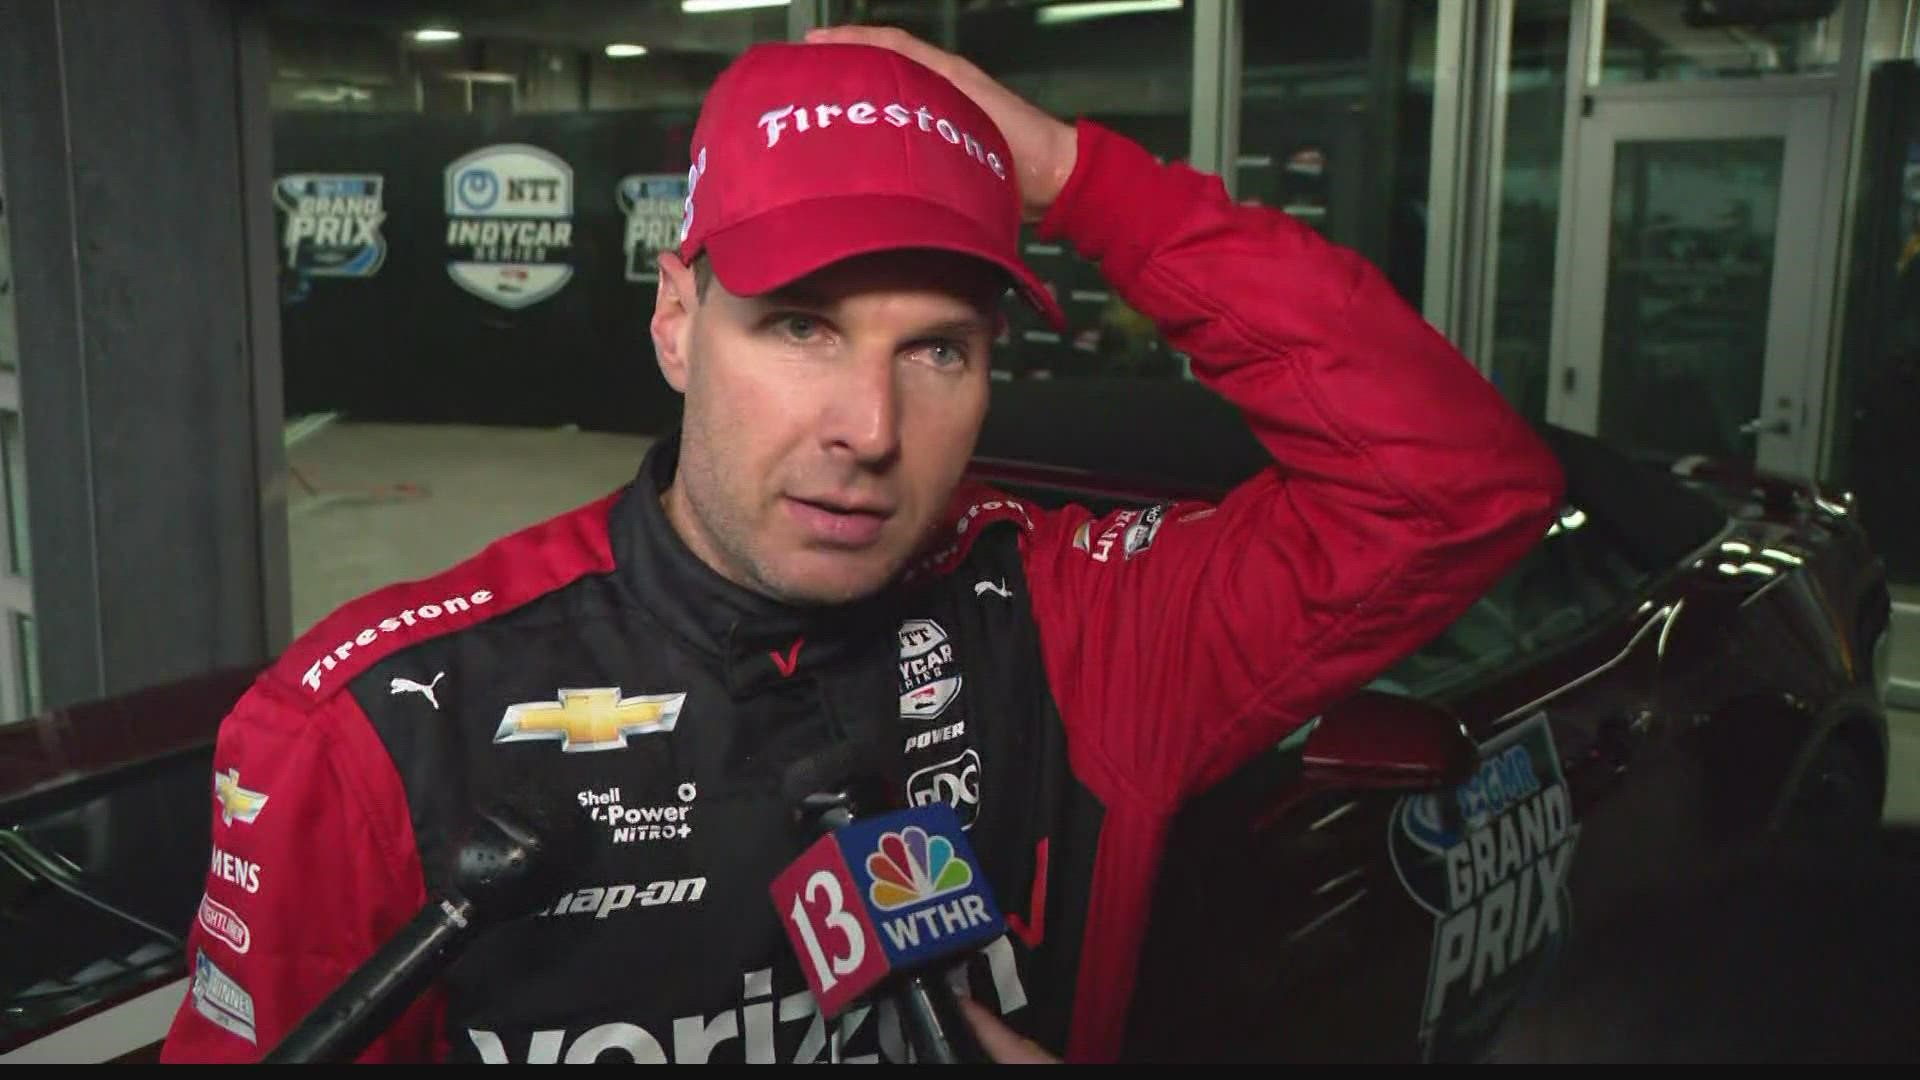 Will Power spoke with 13News after the IndyCar Grand Prix at Indianapolis Motor Speedway on Saturday.